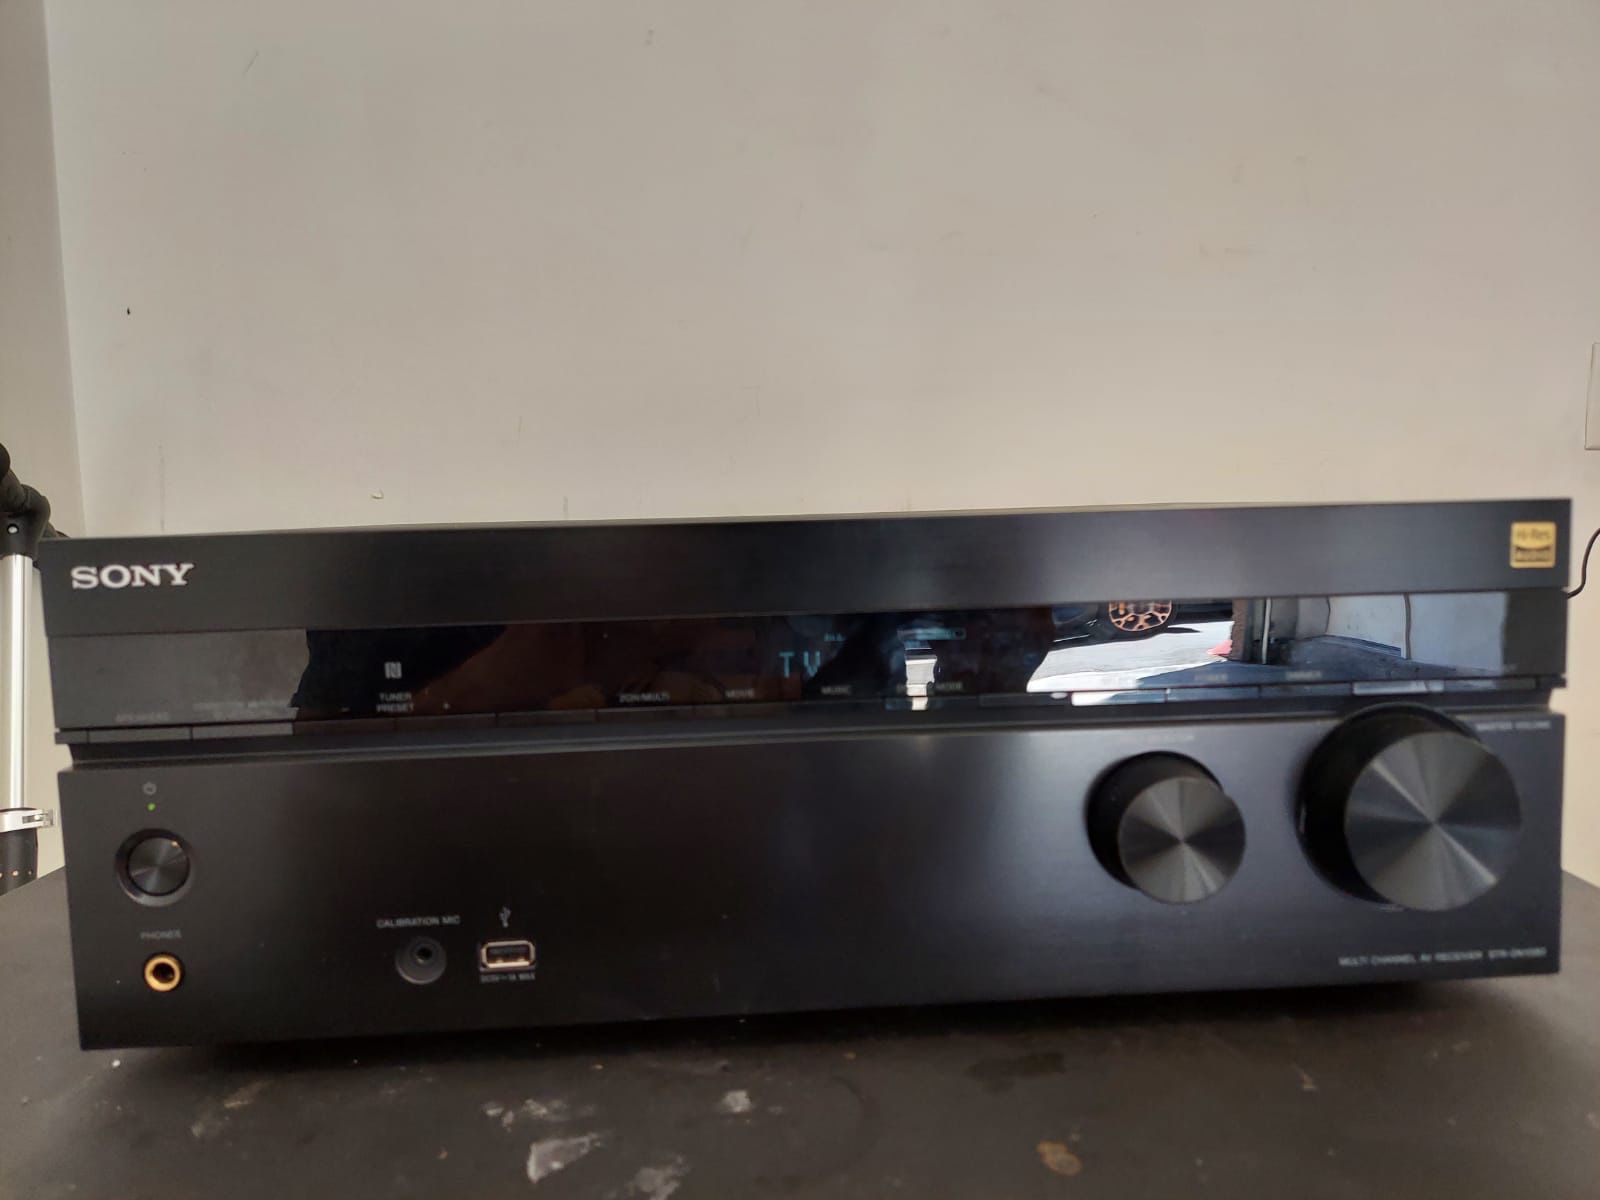 Sony STR-DN1080 7.2 Channel Audio Video Home Theater Receiver